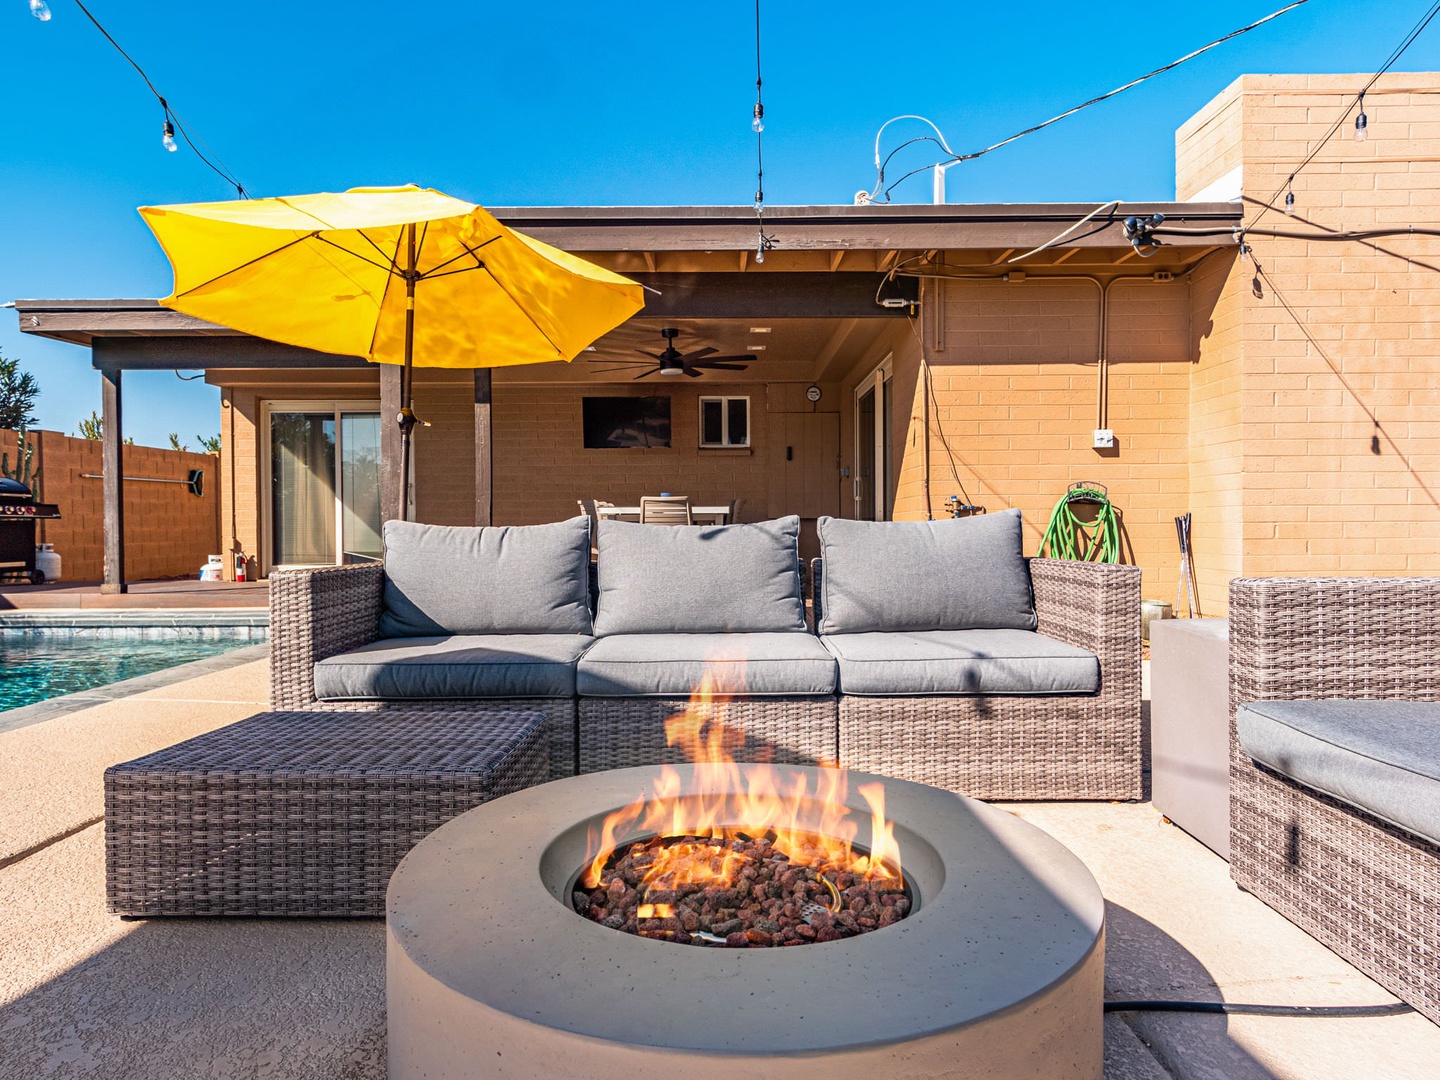 Ample seating around a fire pit